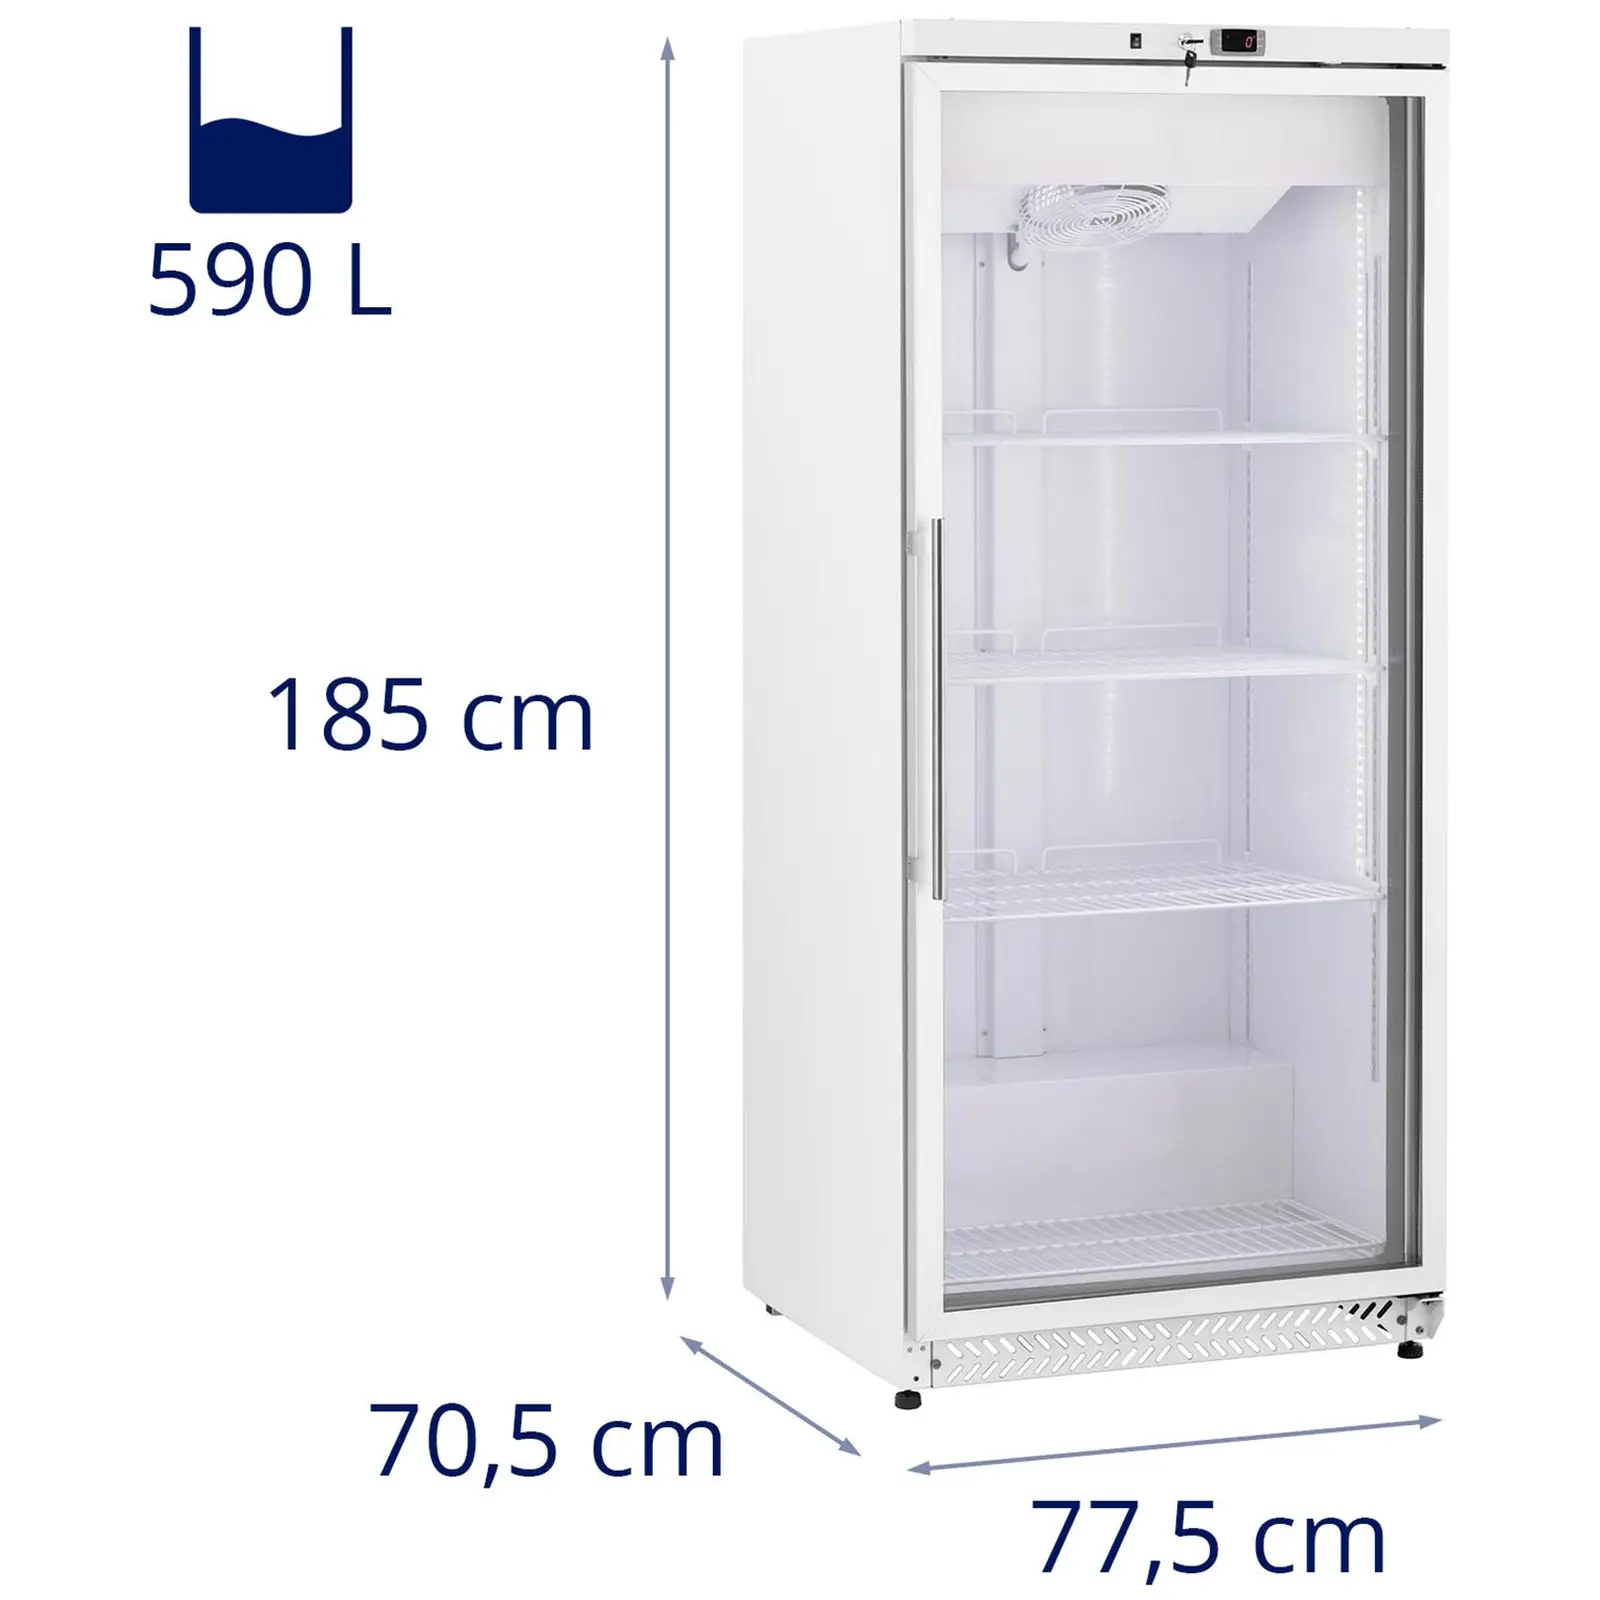 Refrigerator - 590 L - Royal Catering - with glass door